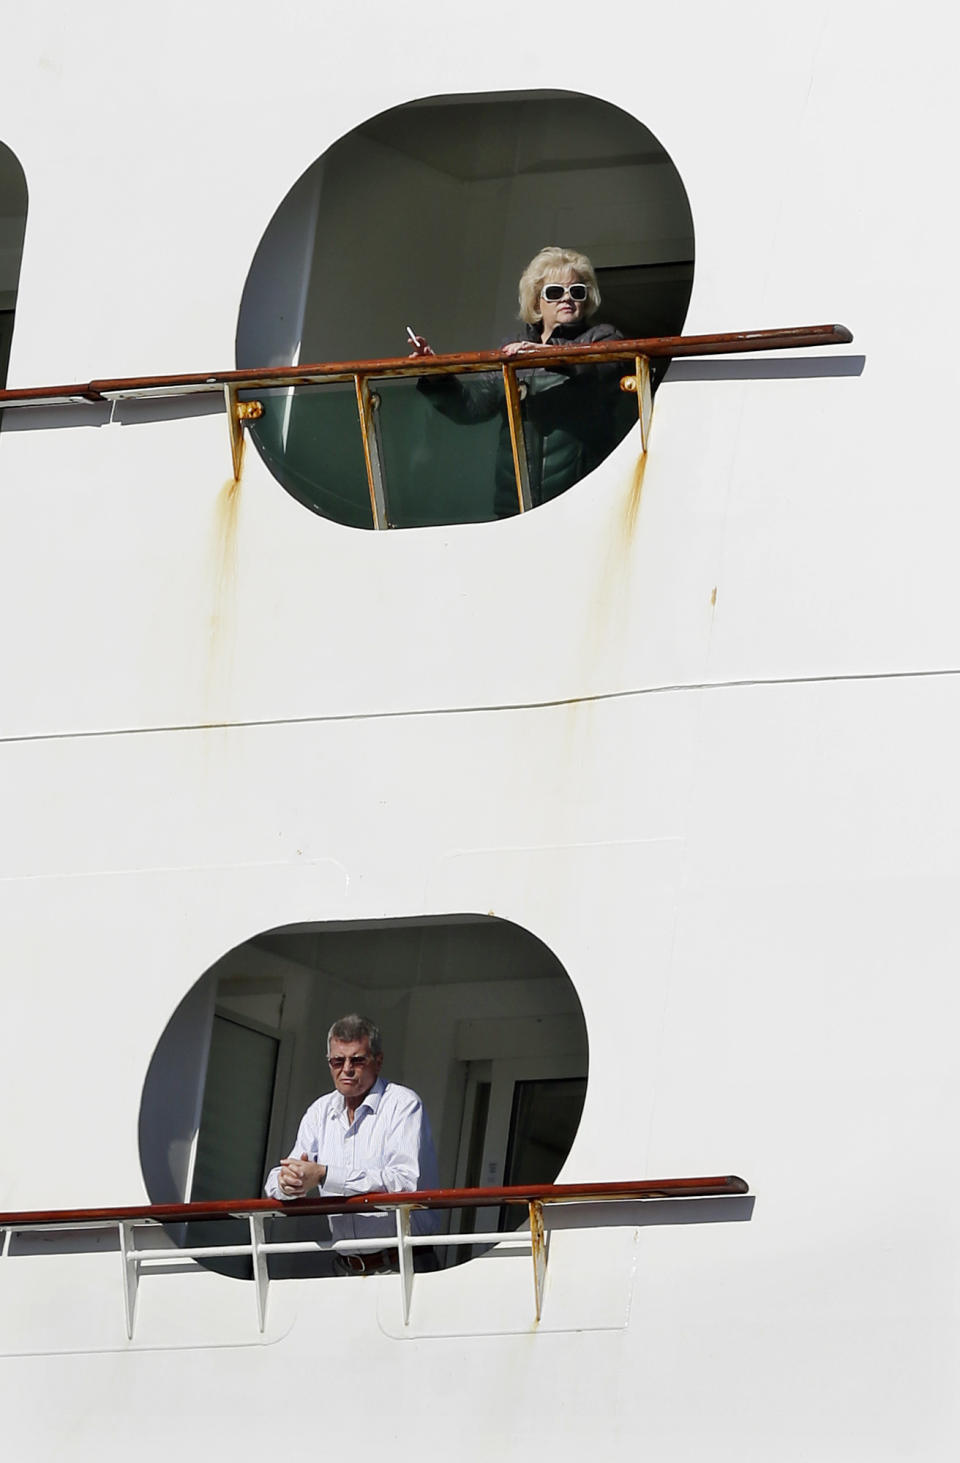 People look out from the Explorer of the Seas cruise ship as it docks at a berth, Wednesday, Jan. 29, 2014, in Bayonne, N.J.. The number of passengers and crew reported stricken ill on the cruise ship has risen to nearly 700. The U.S. Centers for Disease Control and Prevention said Wednesday its latest count puts the number of those sickened aboard the Explorer of the Seas at 630 passengers and 54 crew members. (AP Photo/Mel Evans)